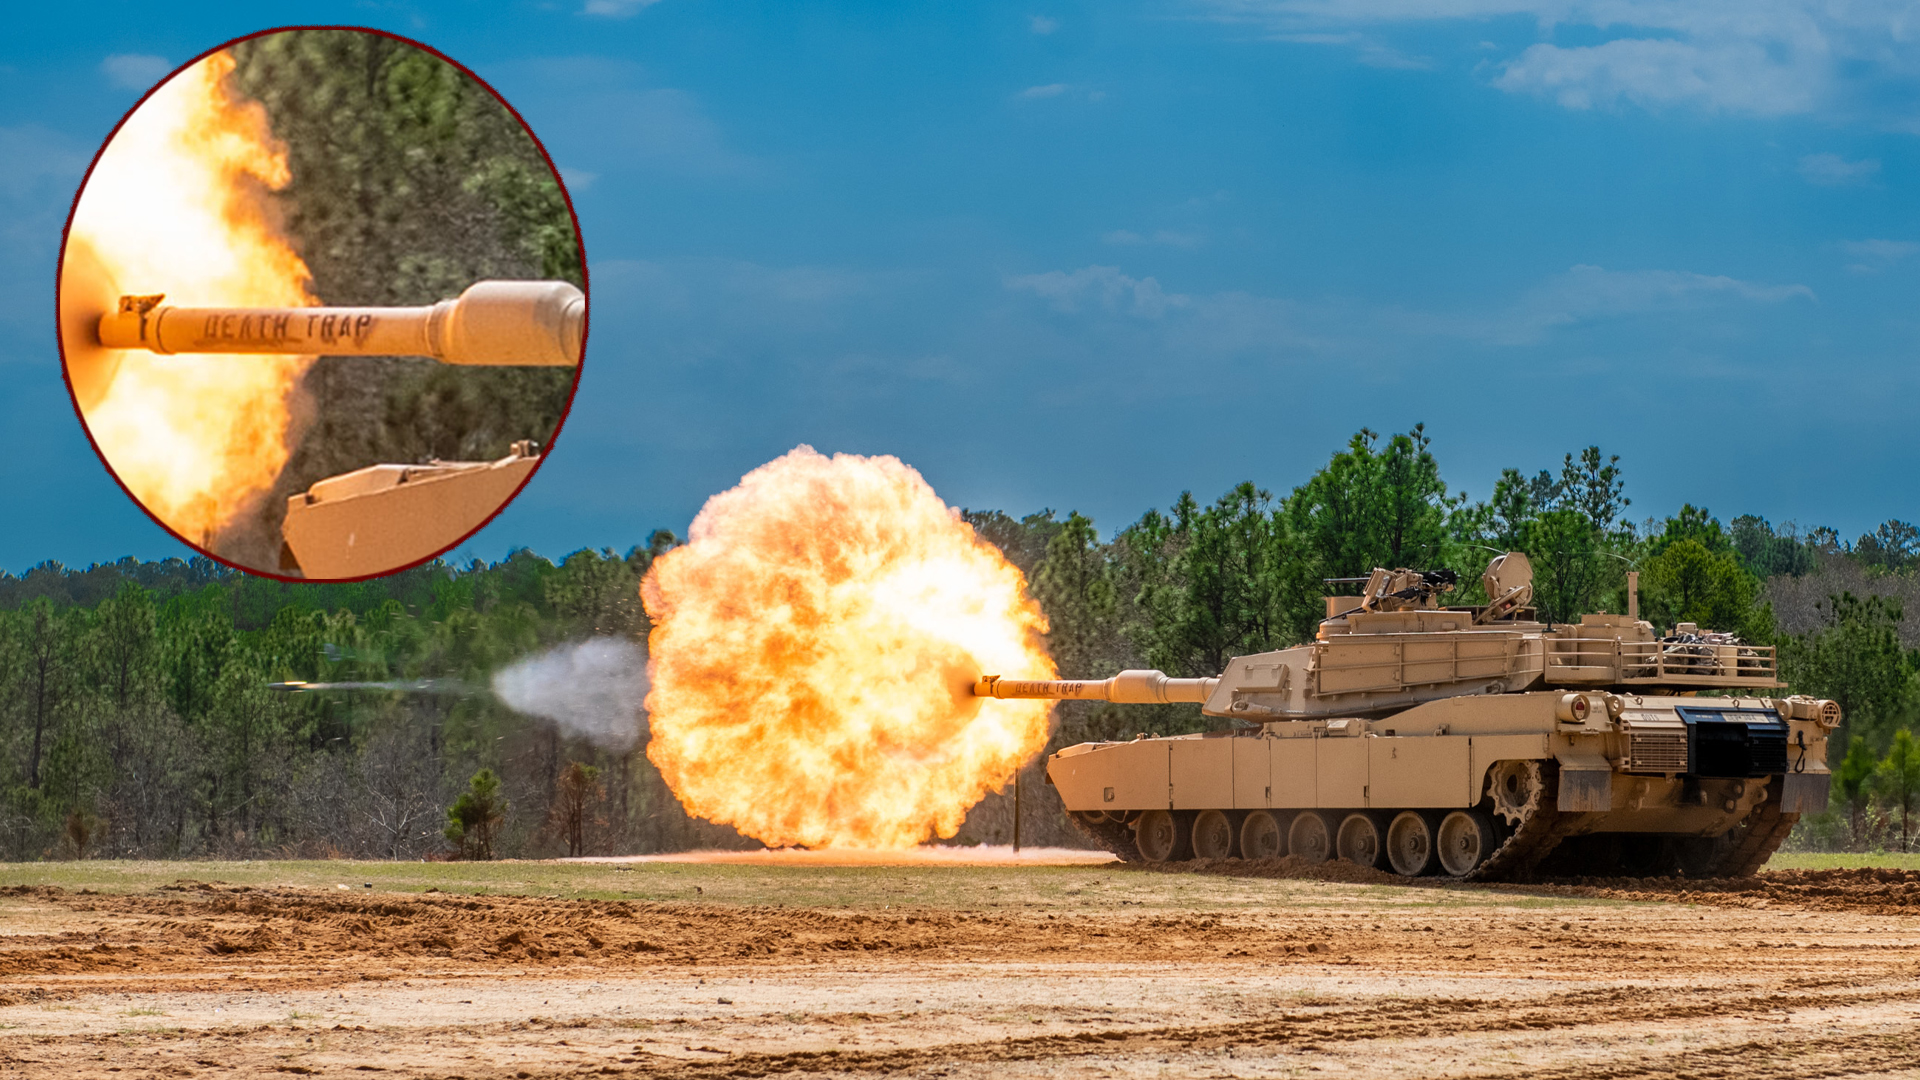 We salute the Army tank crew that named their M1 Abrams ‘Death Trap”